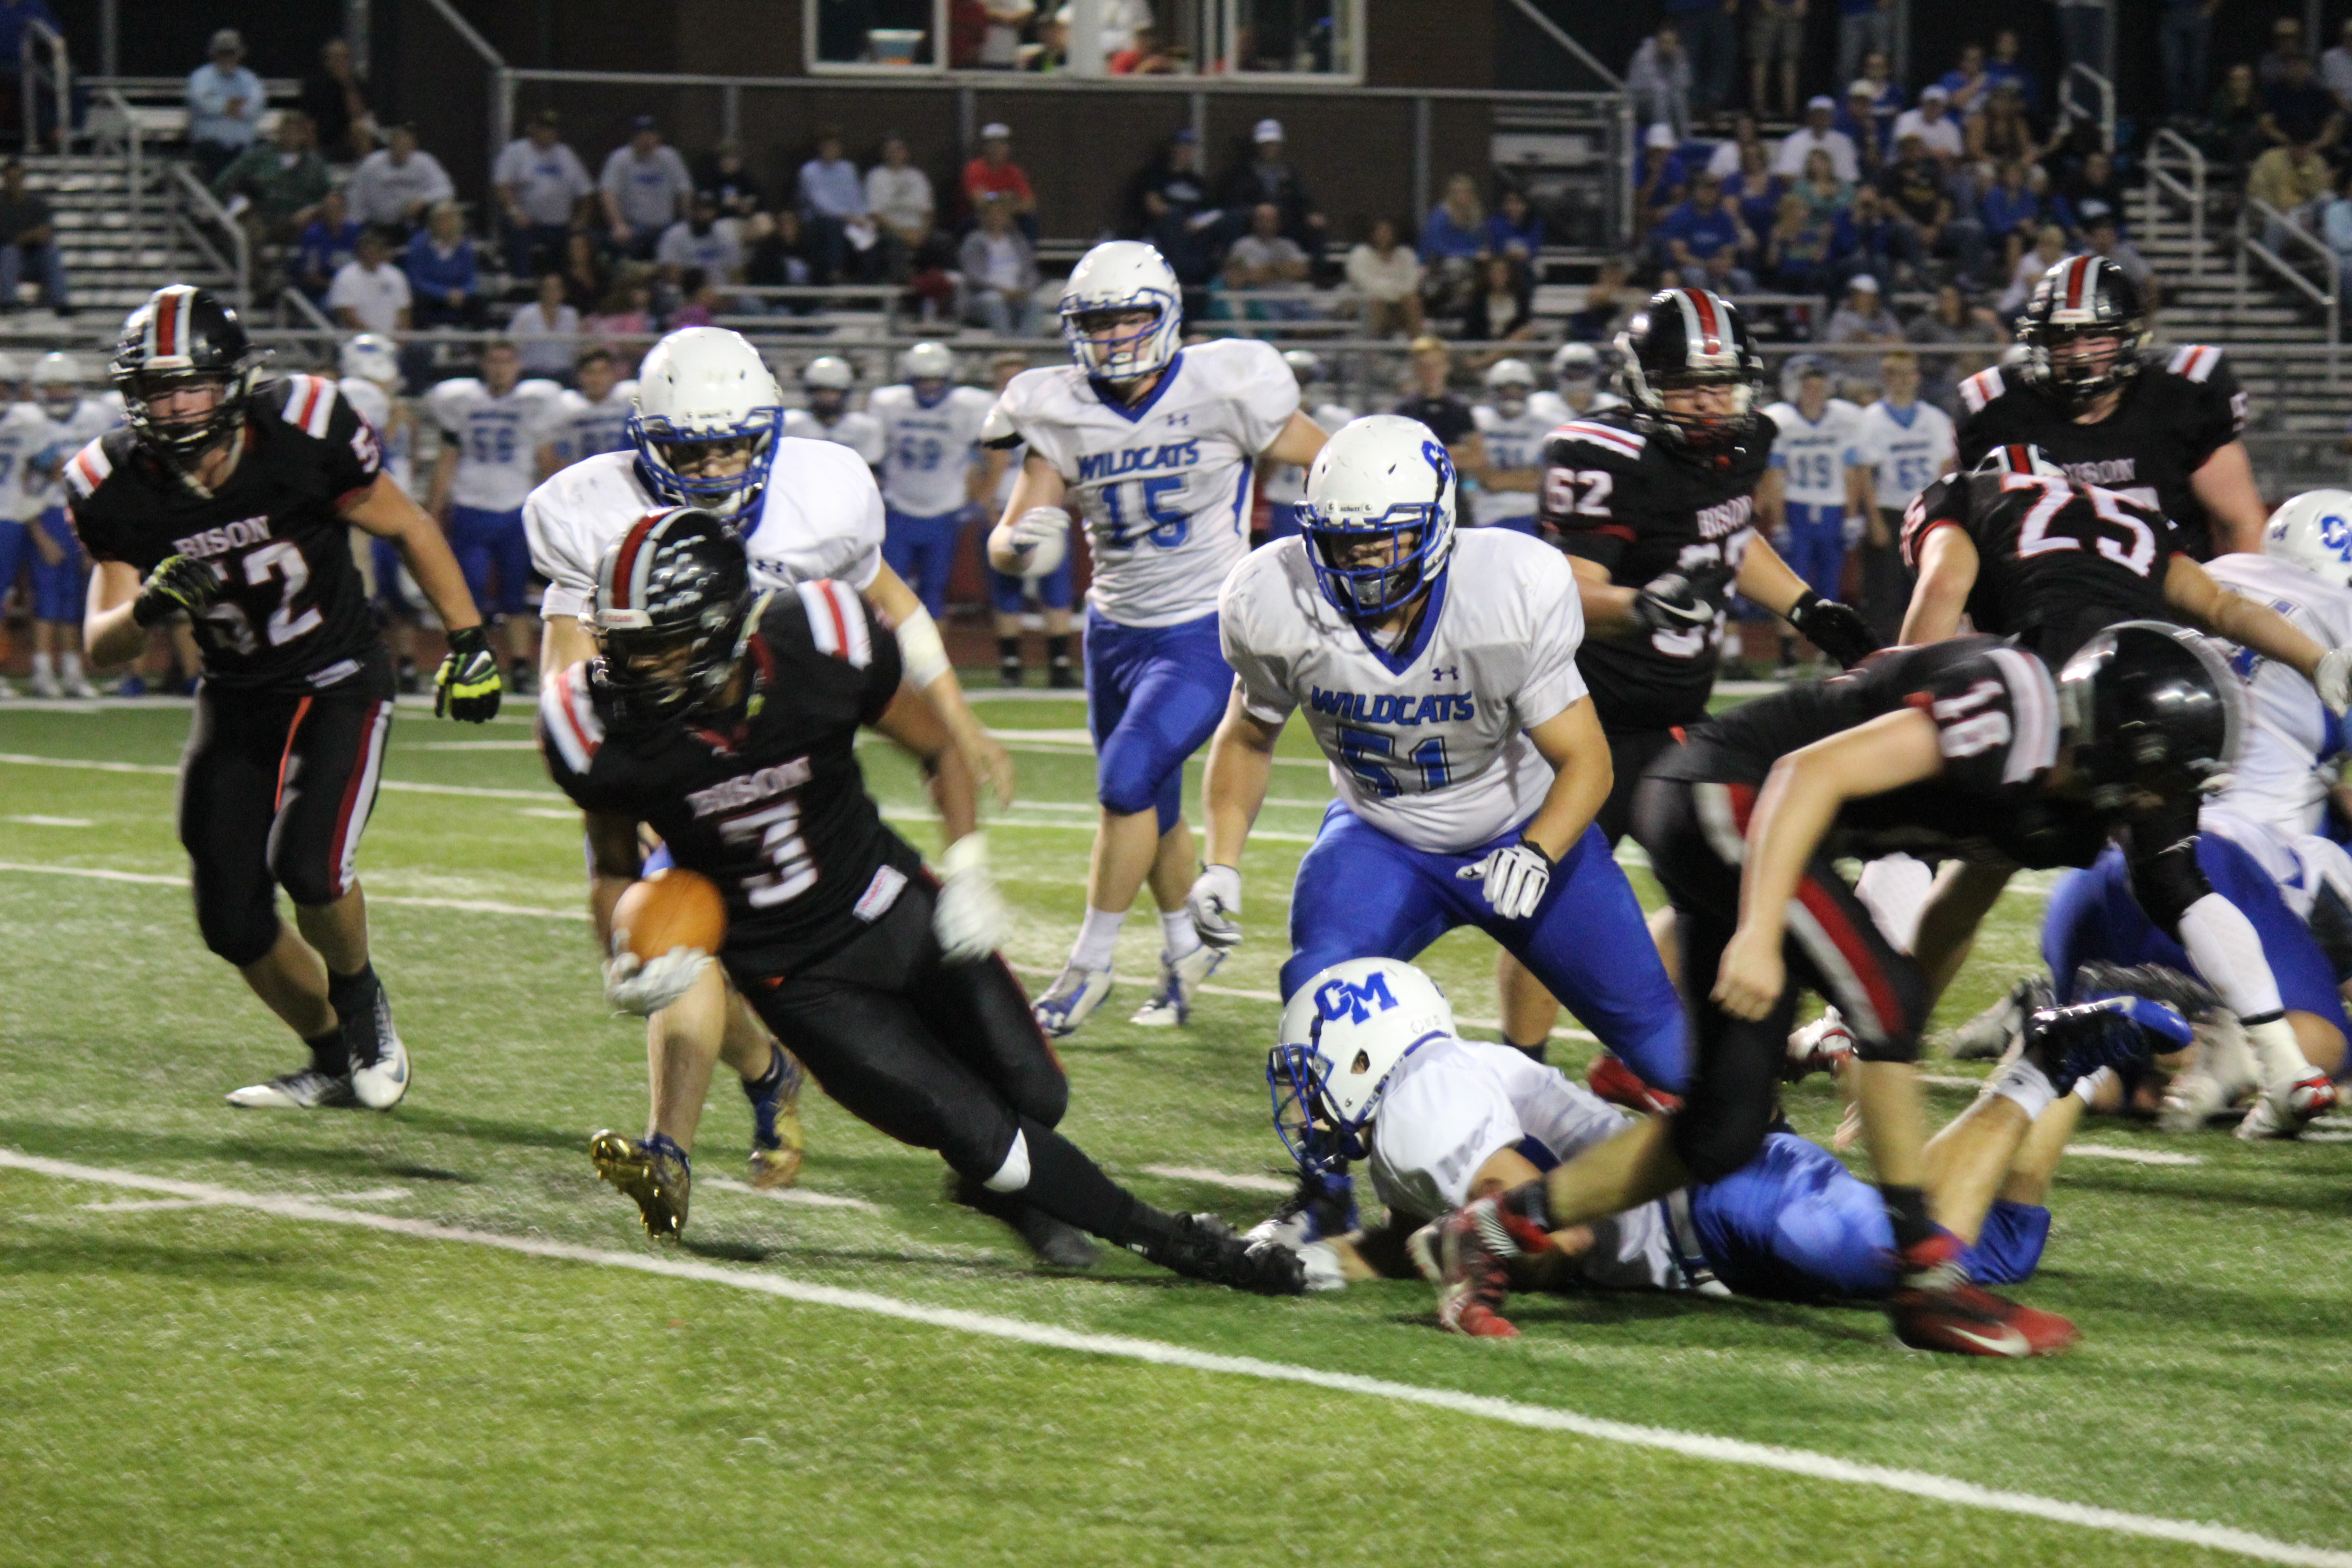 Seth Caldwell (3) came up big when it counted against Central Mountain.